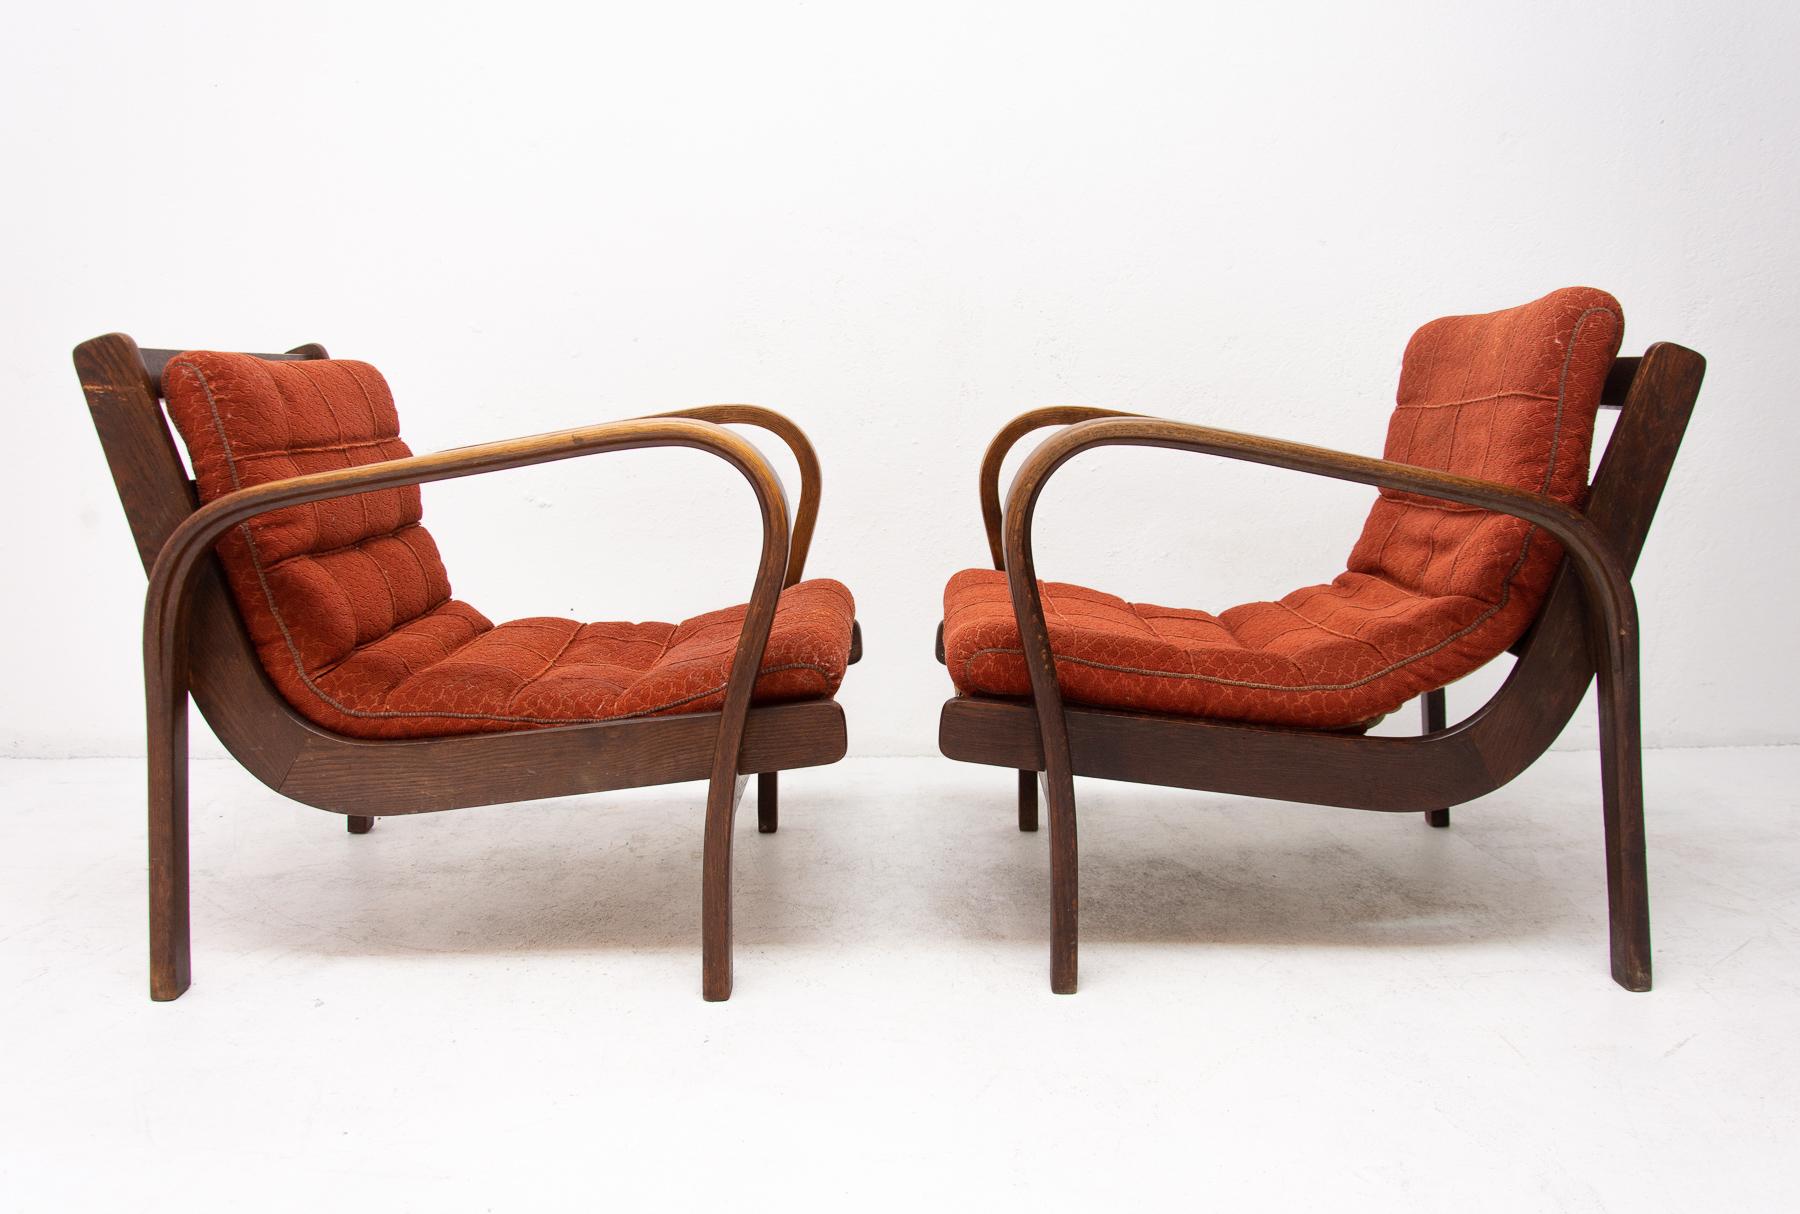 Mid-Century Modern Midcentury Armchairs by Kropacek and Kozelka for Interier Praha 1944, Set of Two